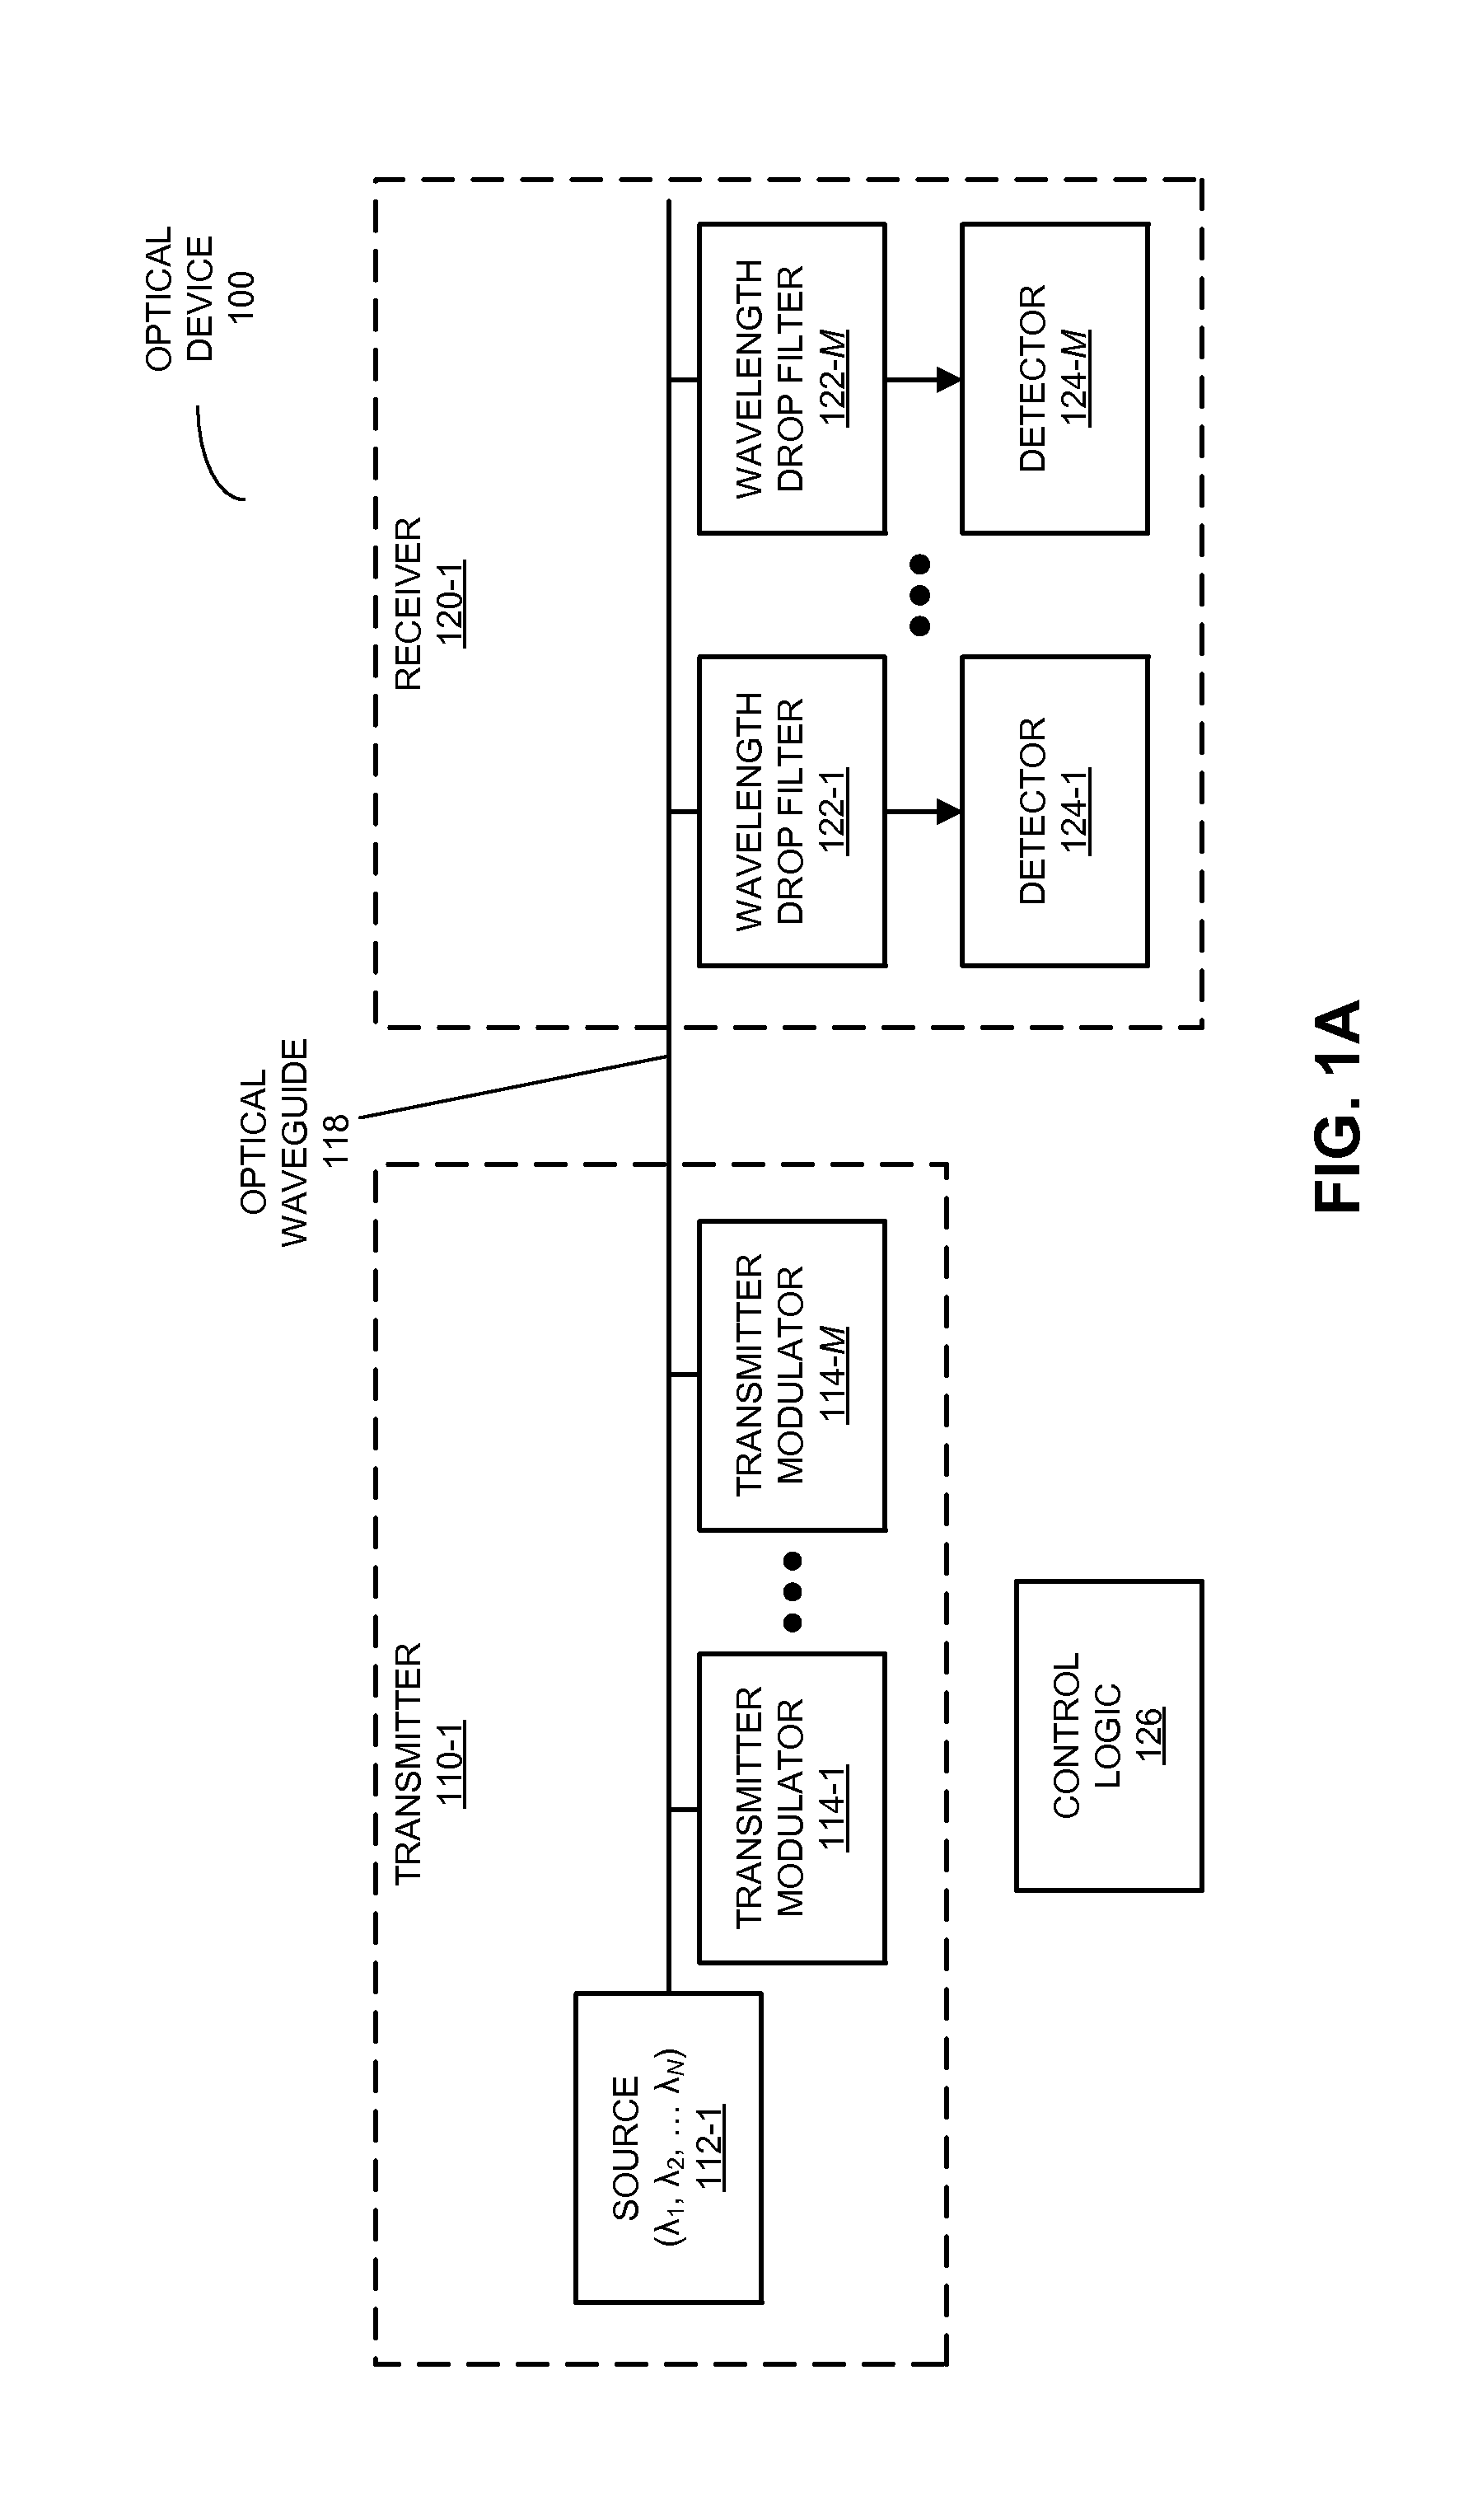 Optical device with reduced thermal tuning energy